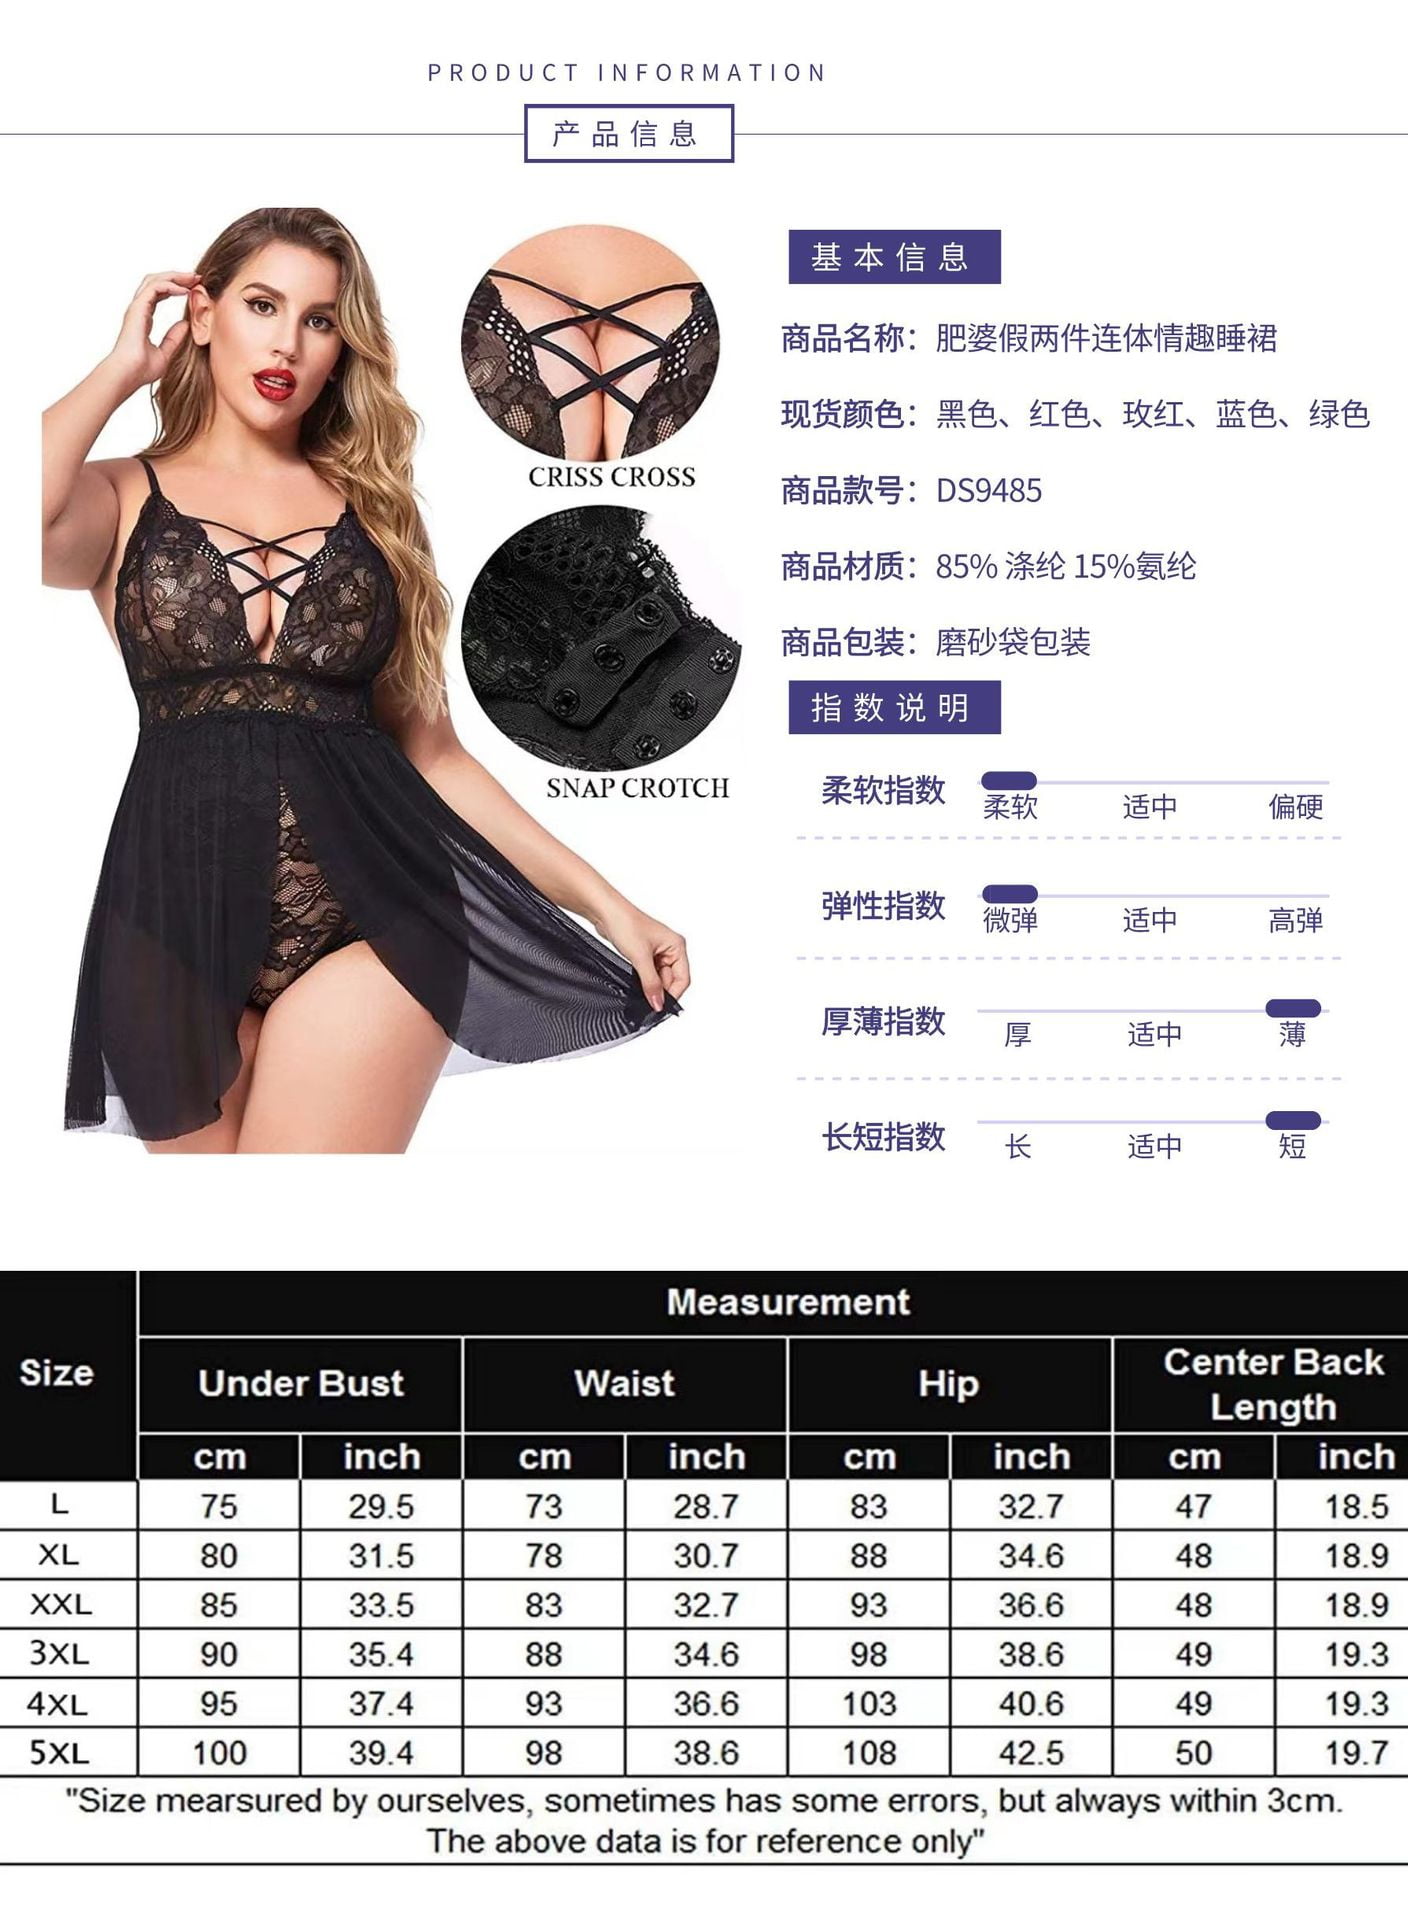 Sexy Lingerie For Women,V Neck Nightwear Satin Sleepwear Lace Chemise Mini Teddy WomenS Lingerie Sleep and Lounge Sex Nightgown for Women,Sex Gift For Husband image